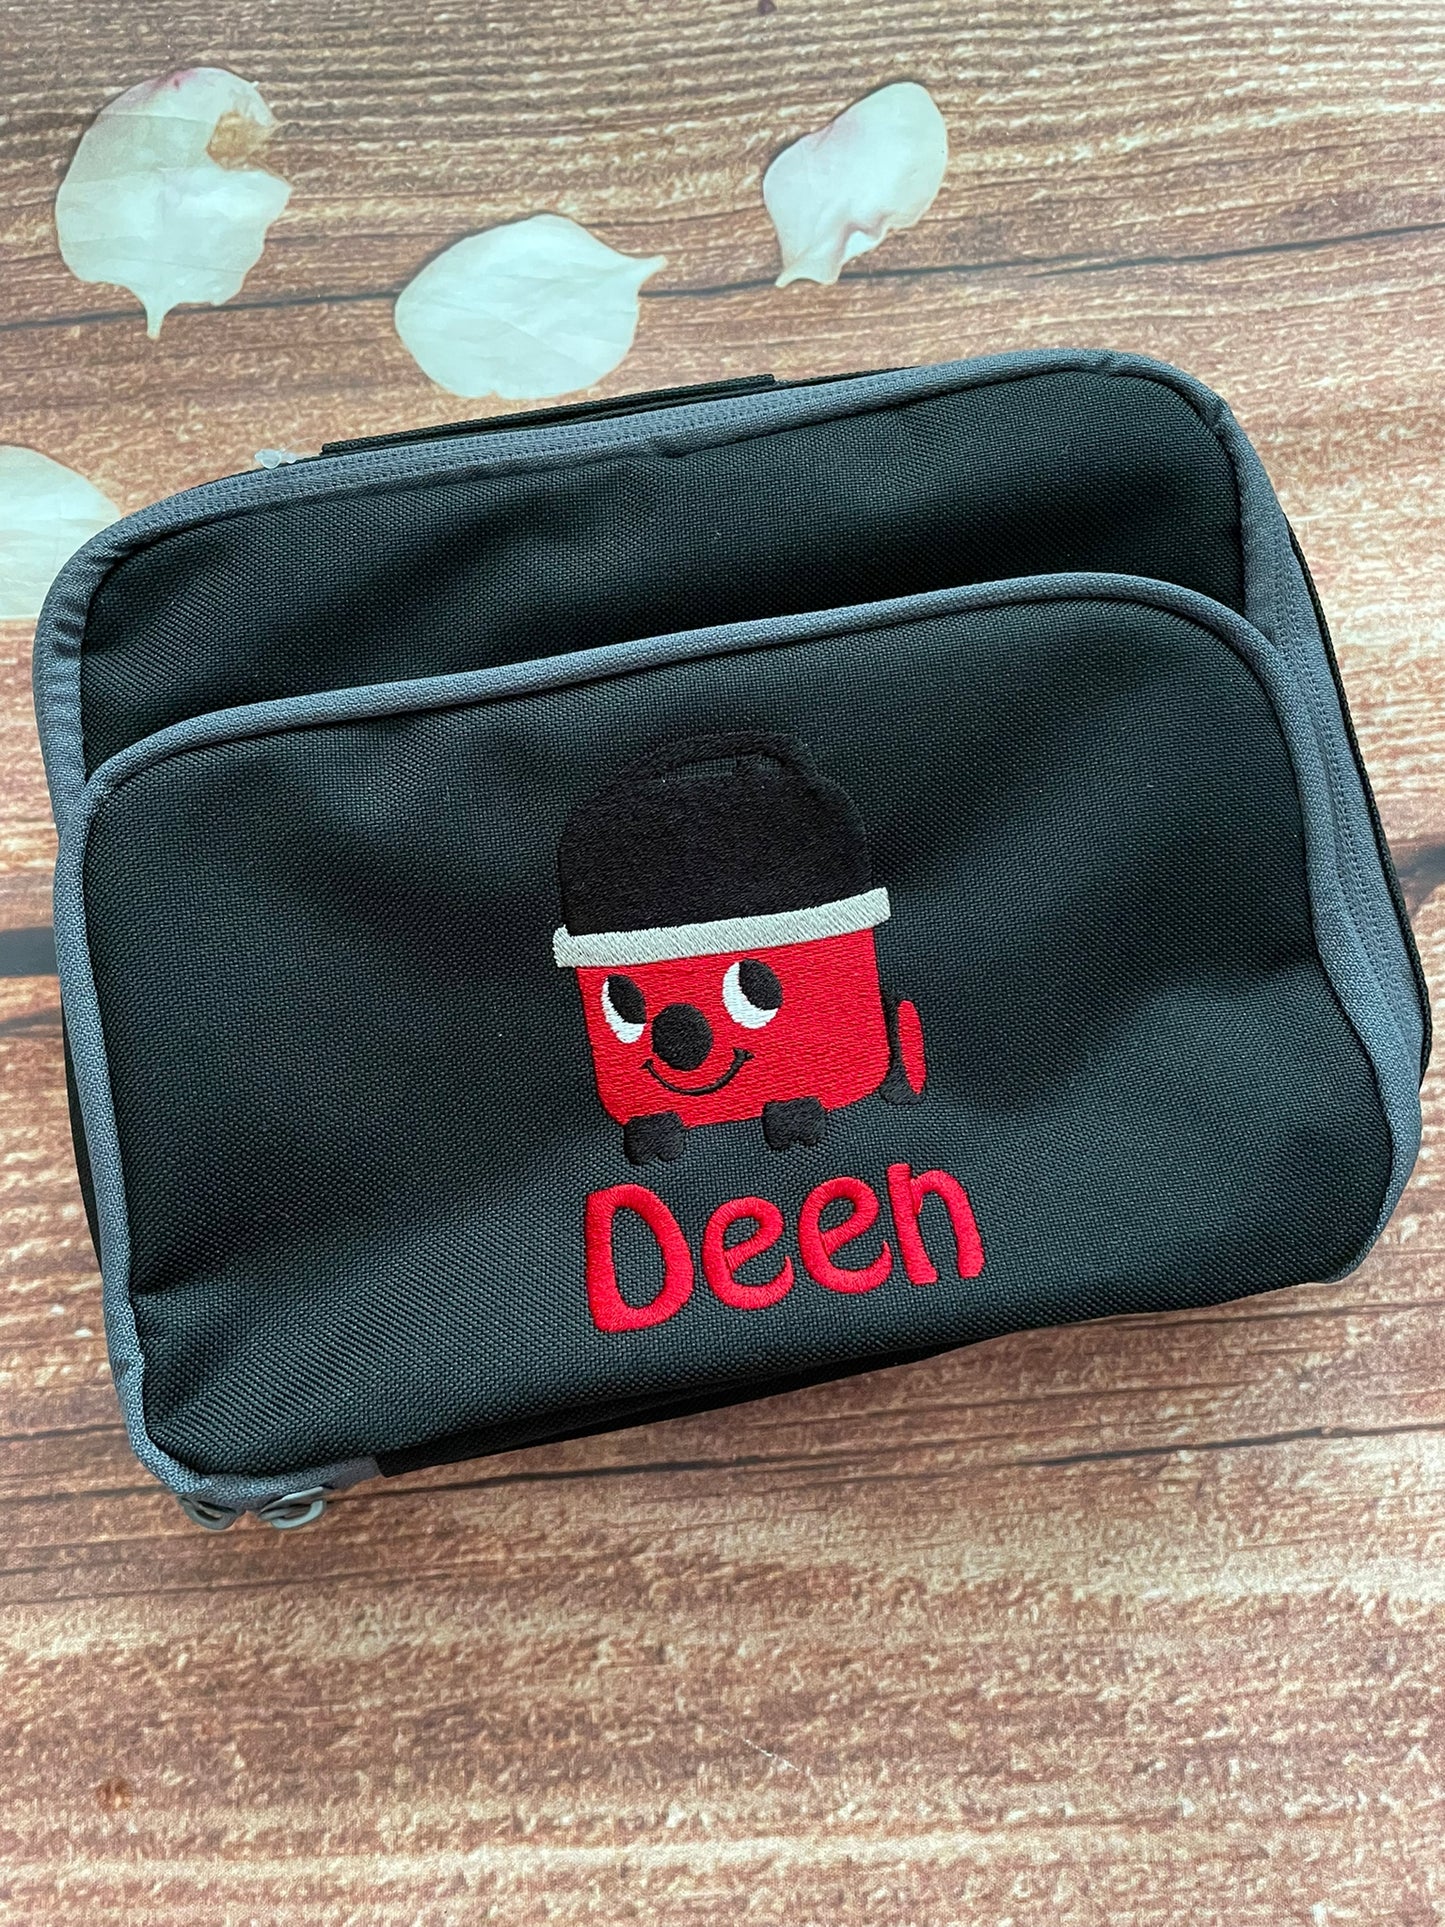 Personalised lunch box - Hoover design